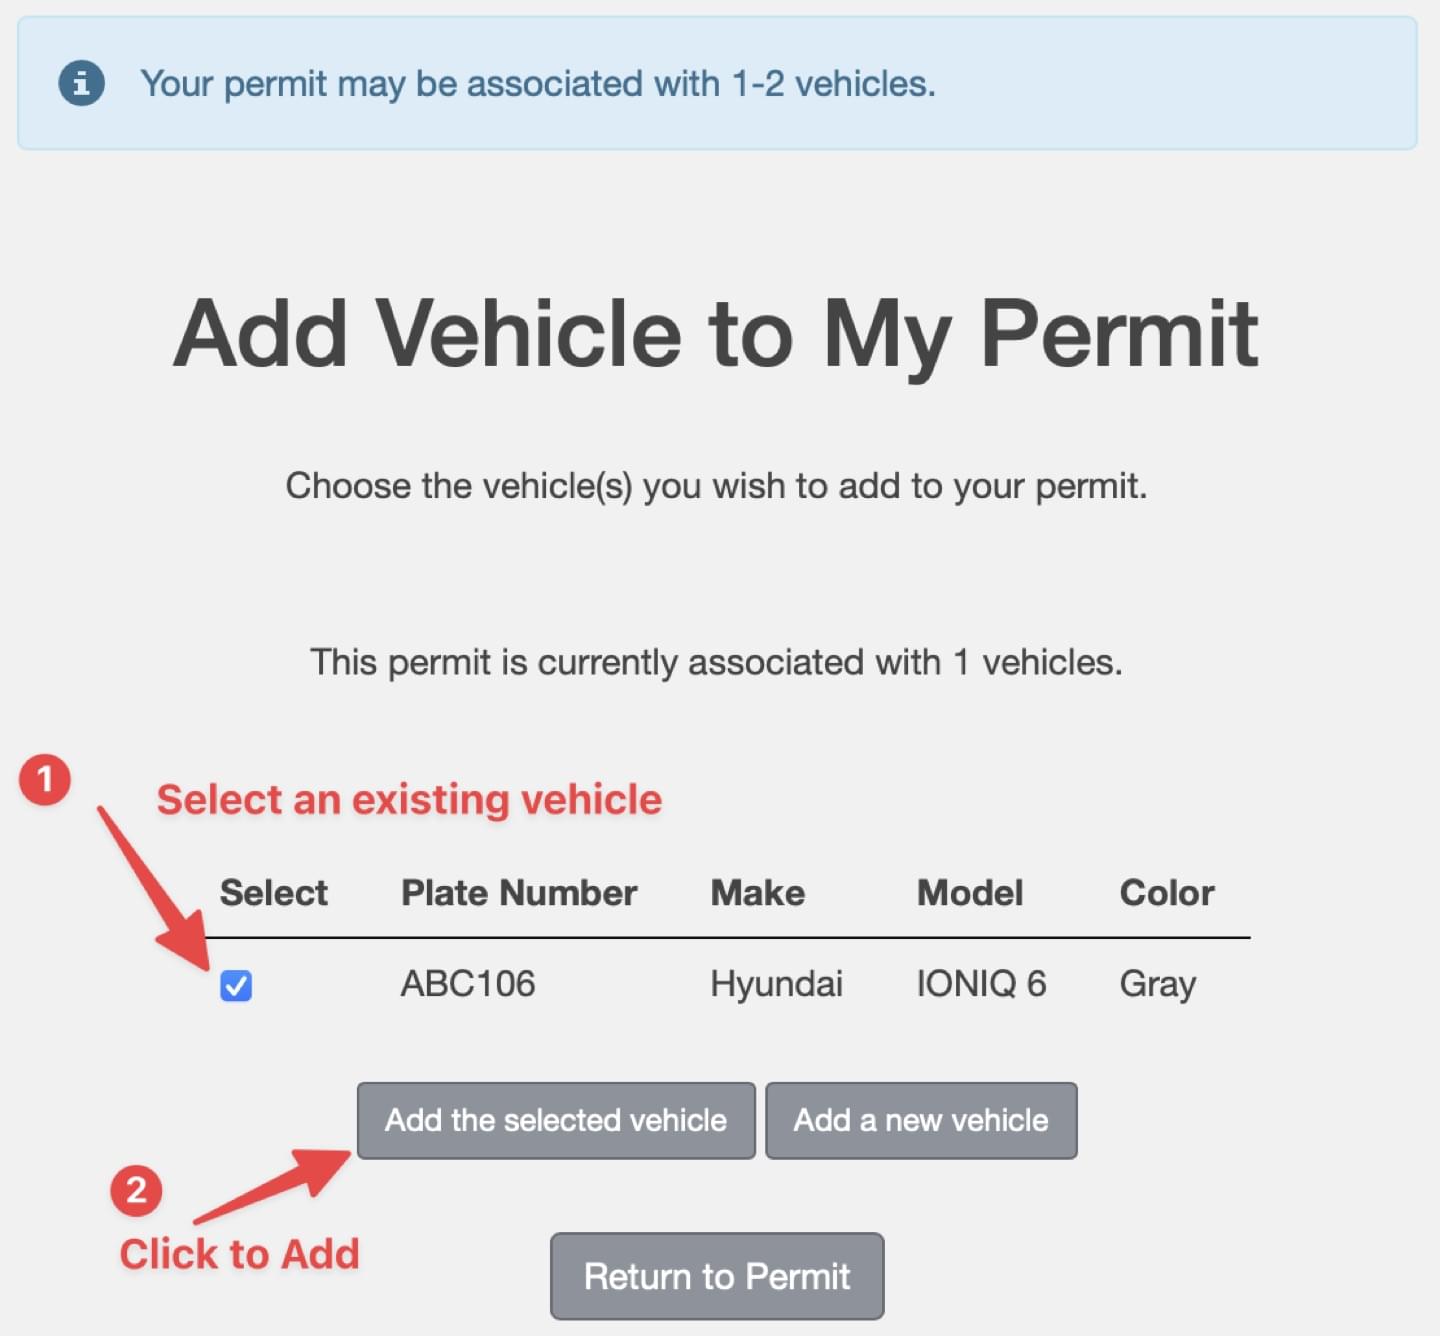 Add Vehicle to permit